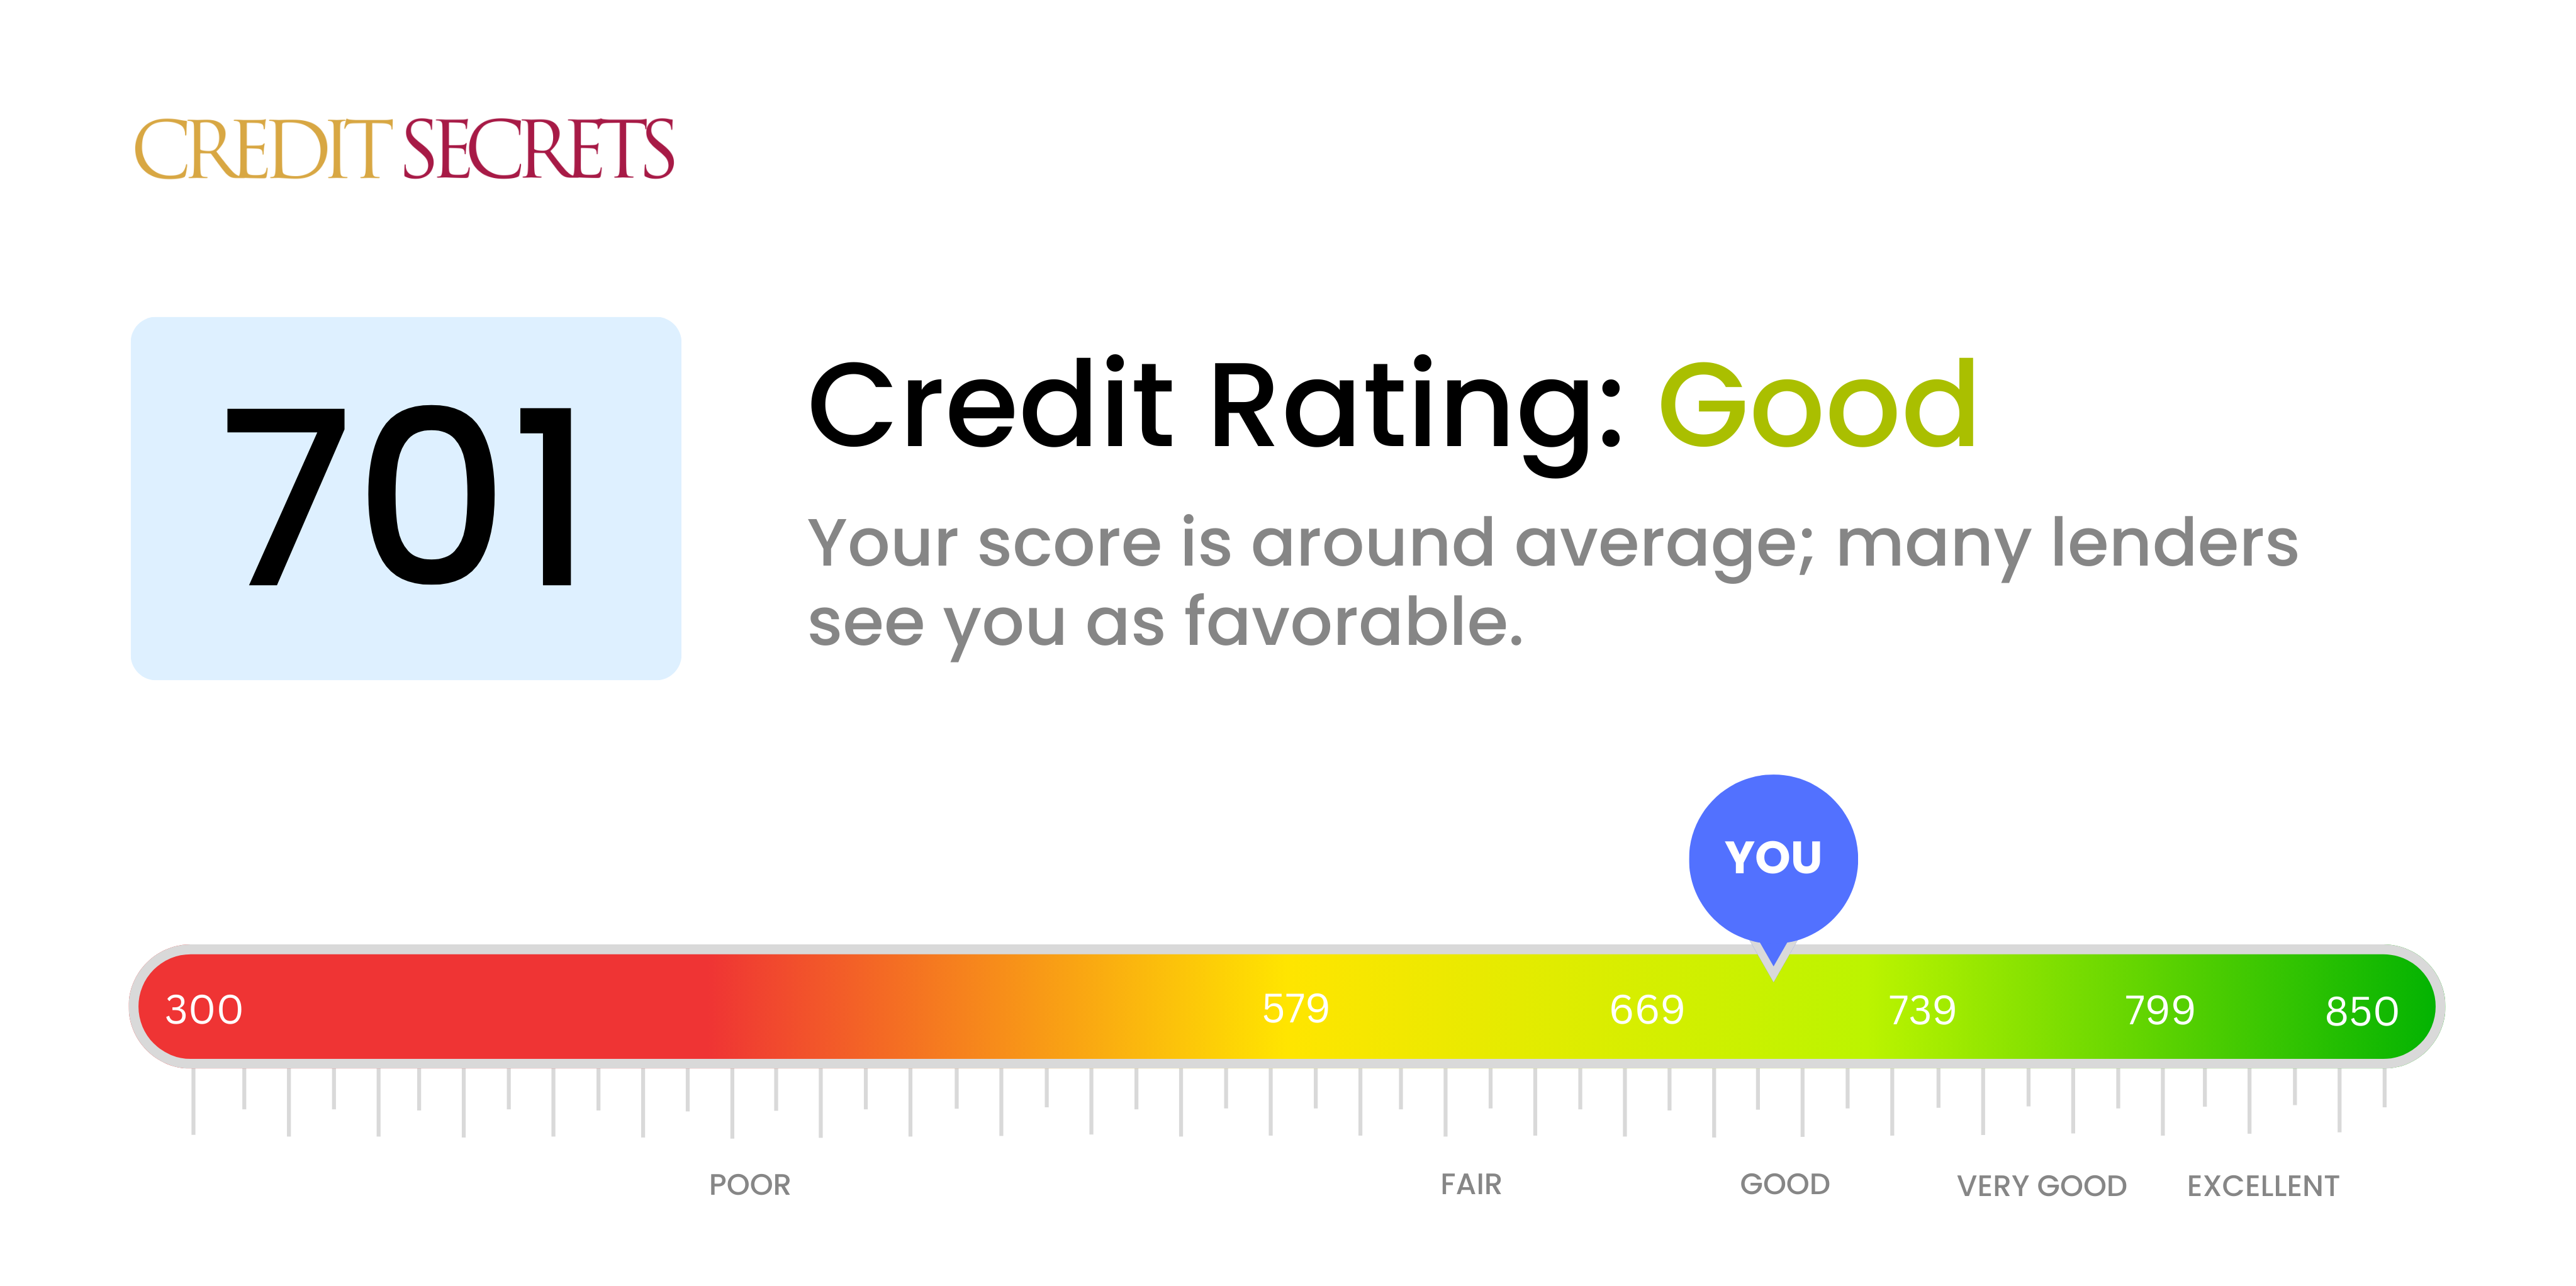 Is 701 a good credit score?